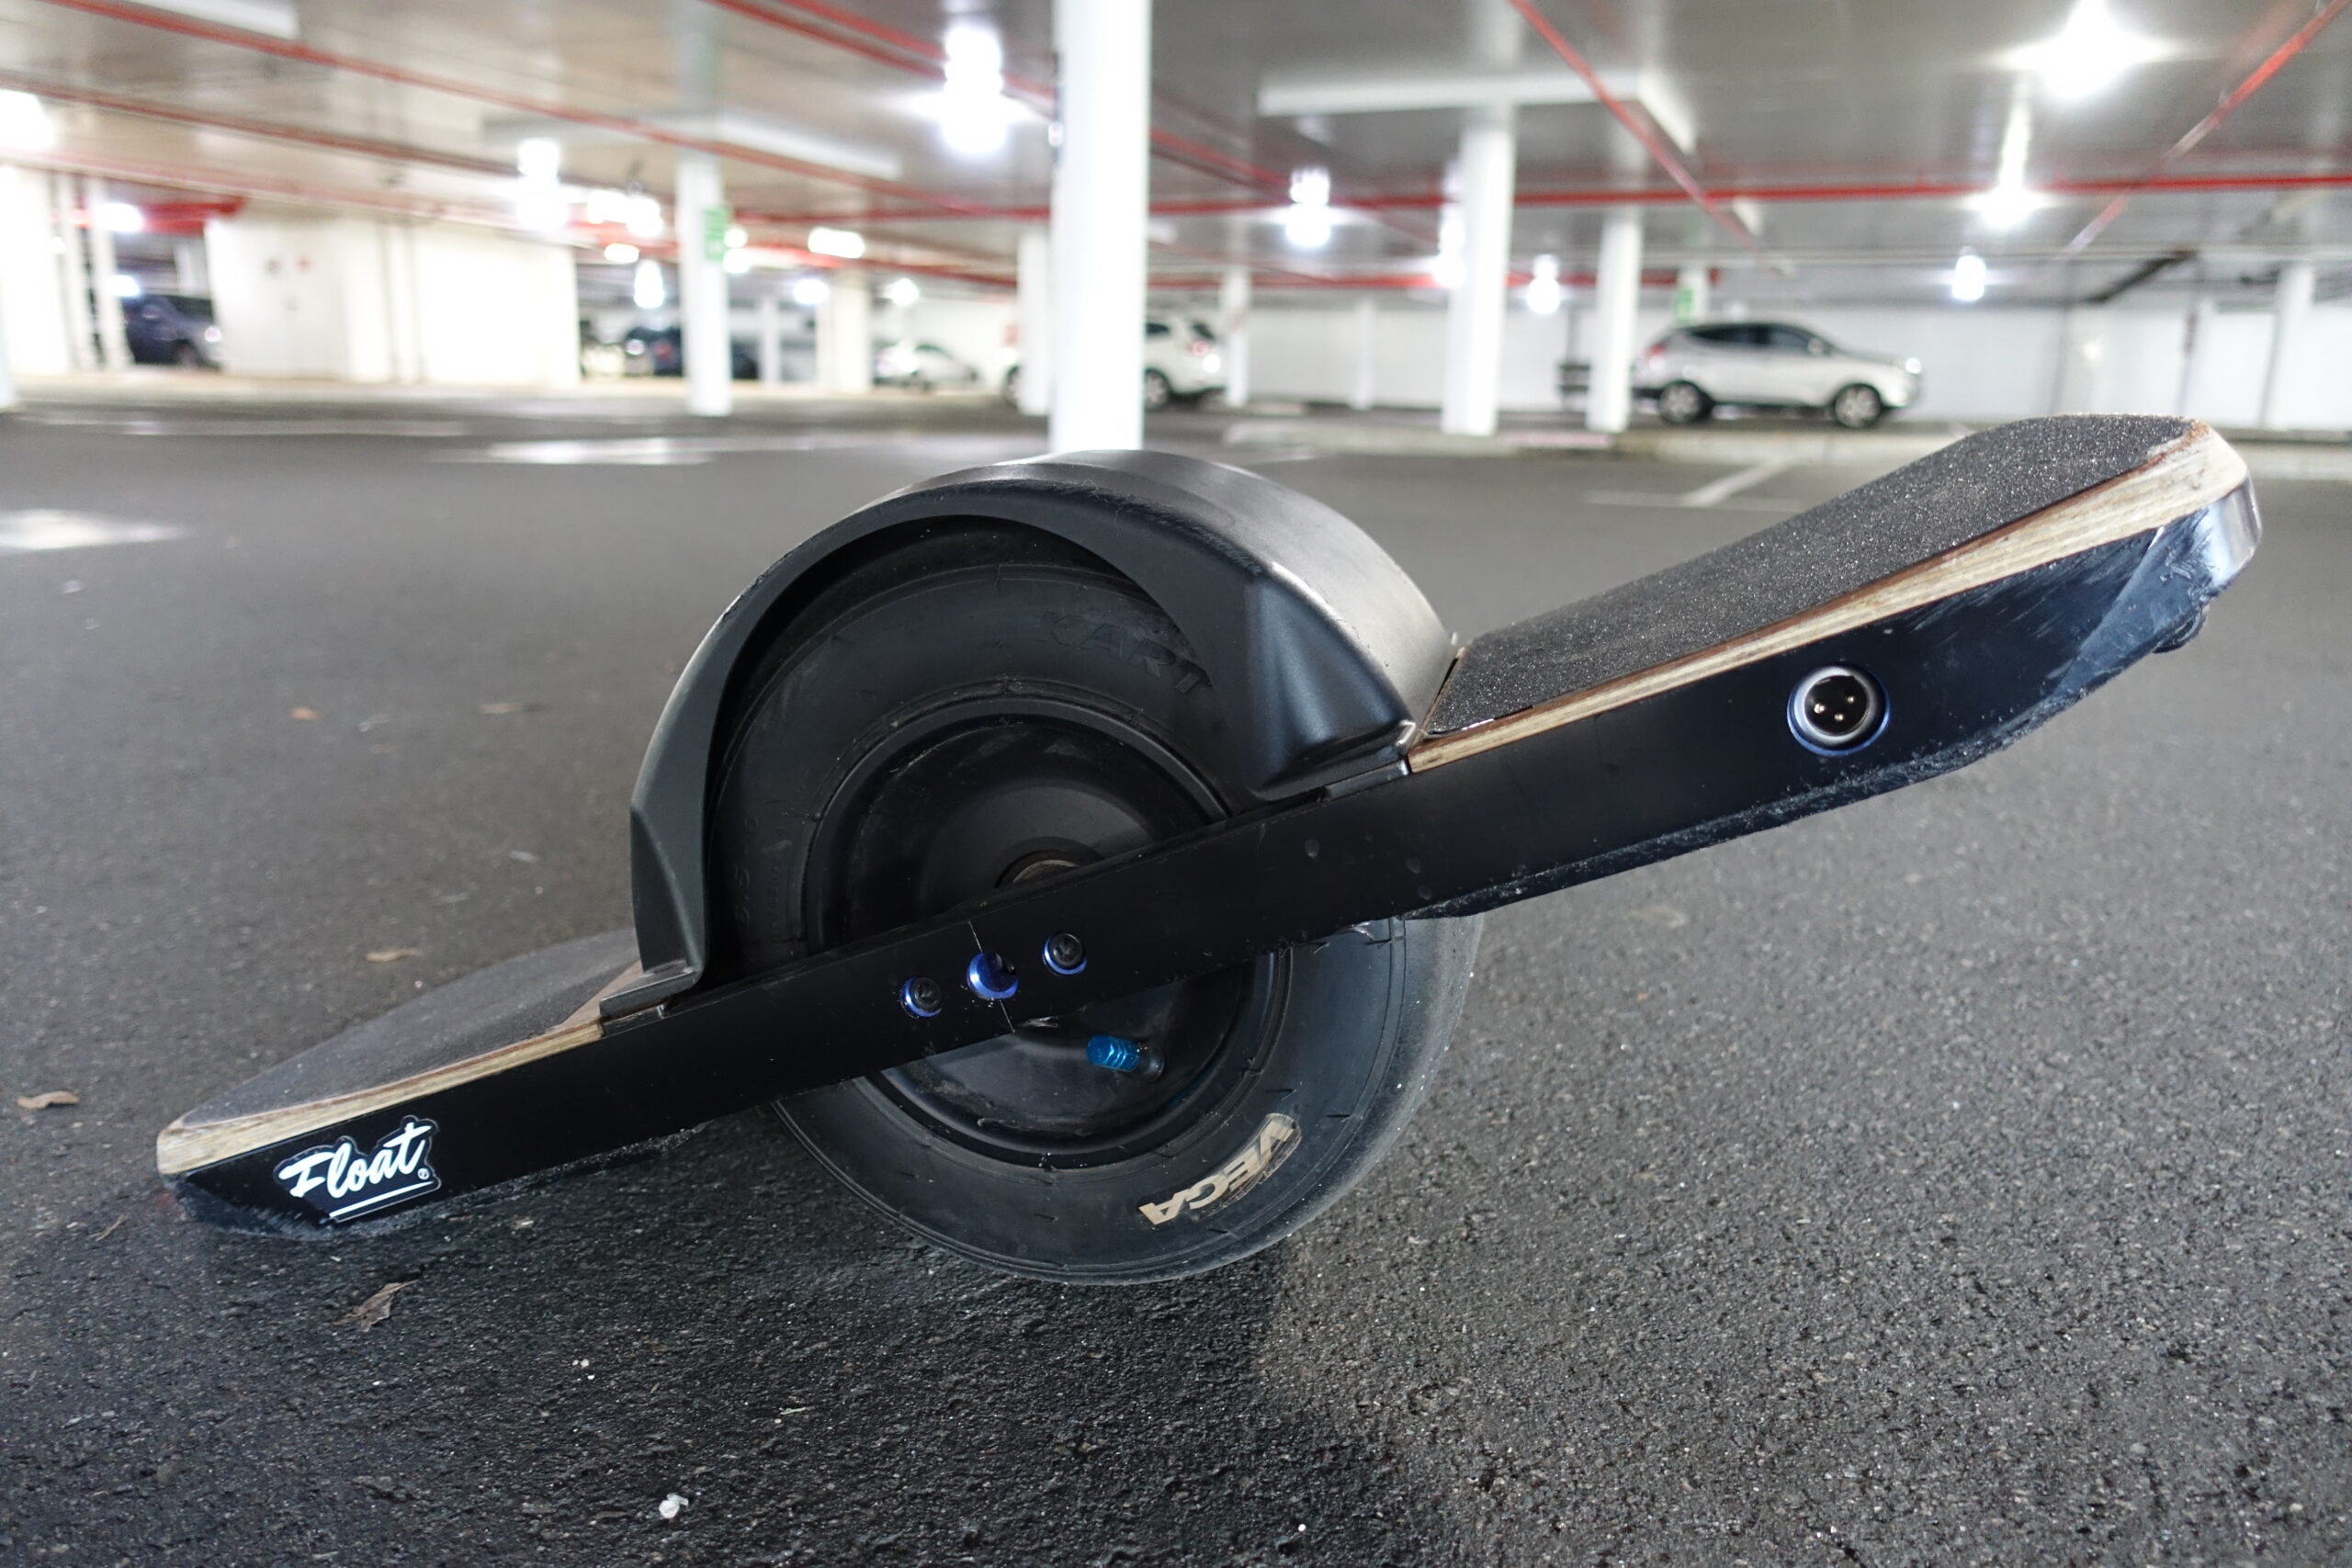 A close up of the Onewheel - a skateboard-esque vehicle with a single large wheel in the middle of the board.